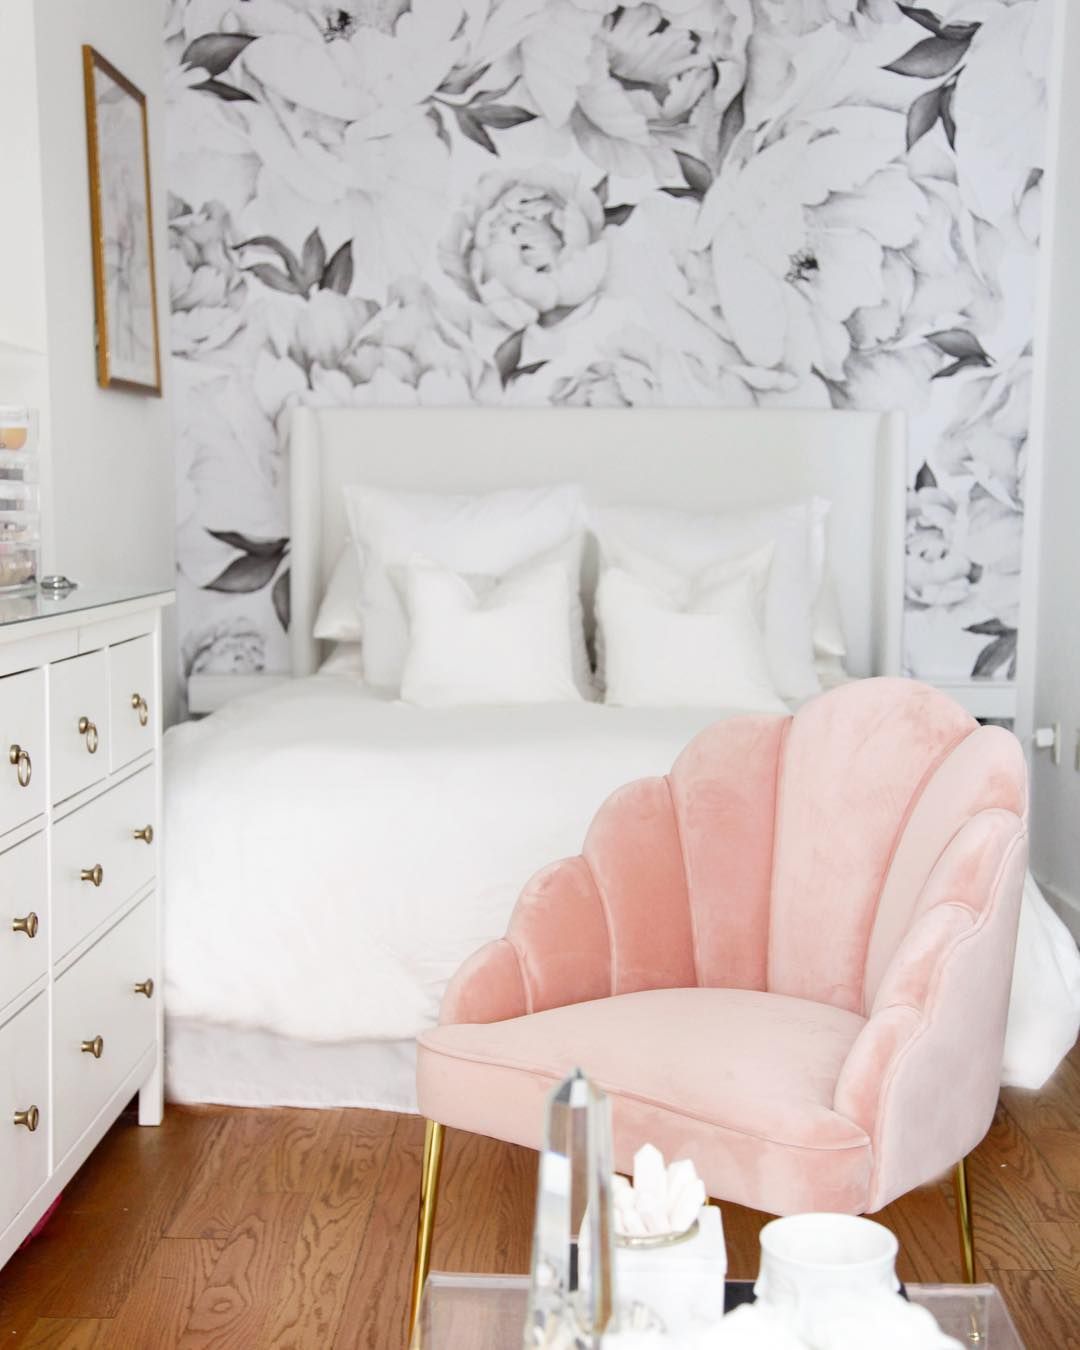 Glam bedroom decor with Pink Channeled Accent Chair via @citychicdecor